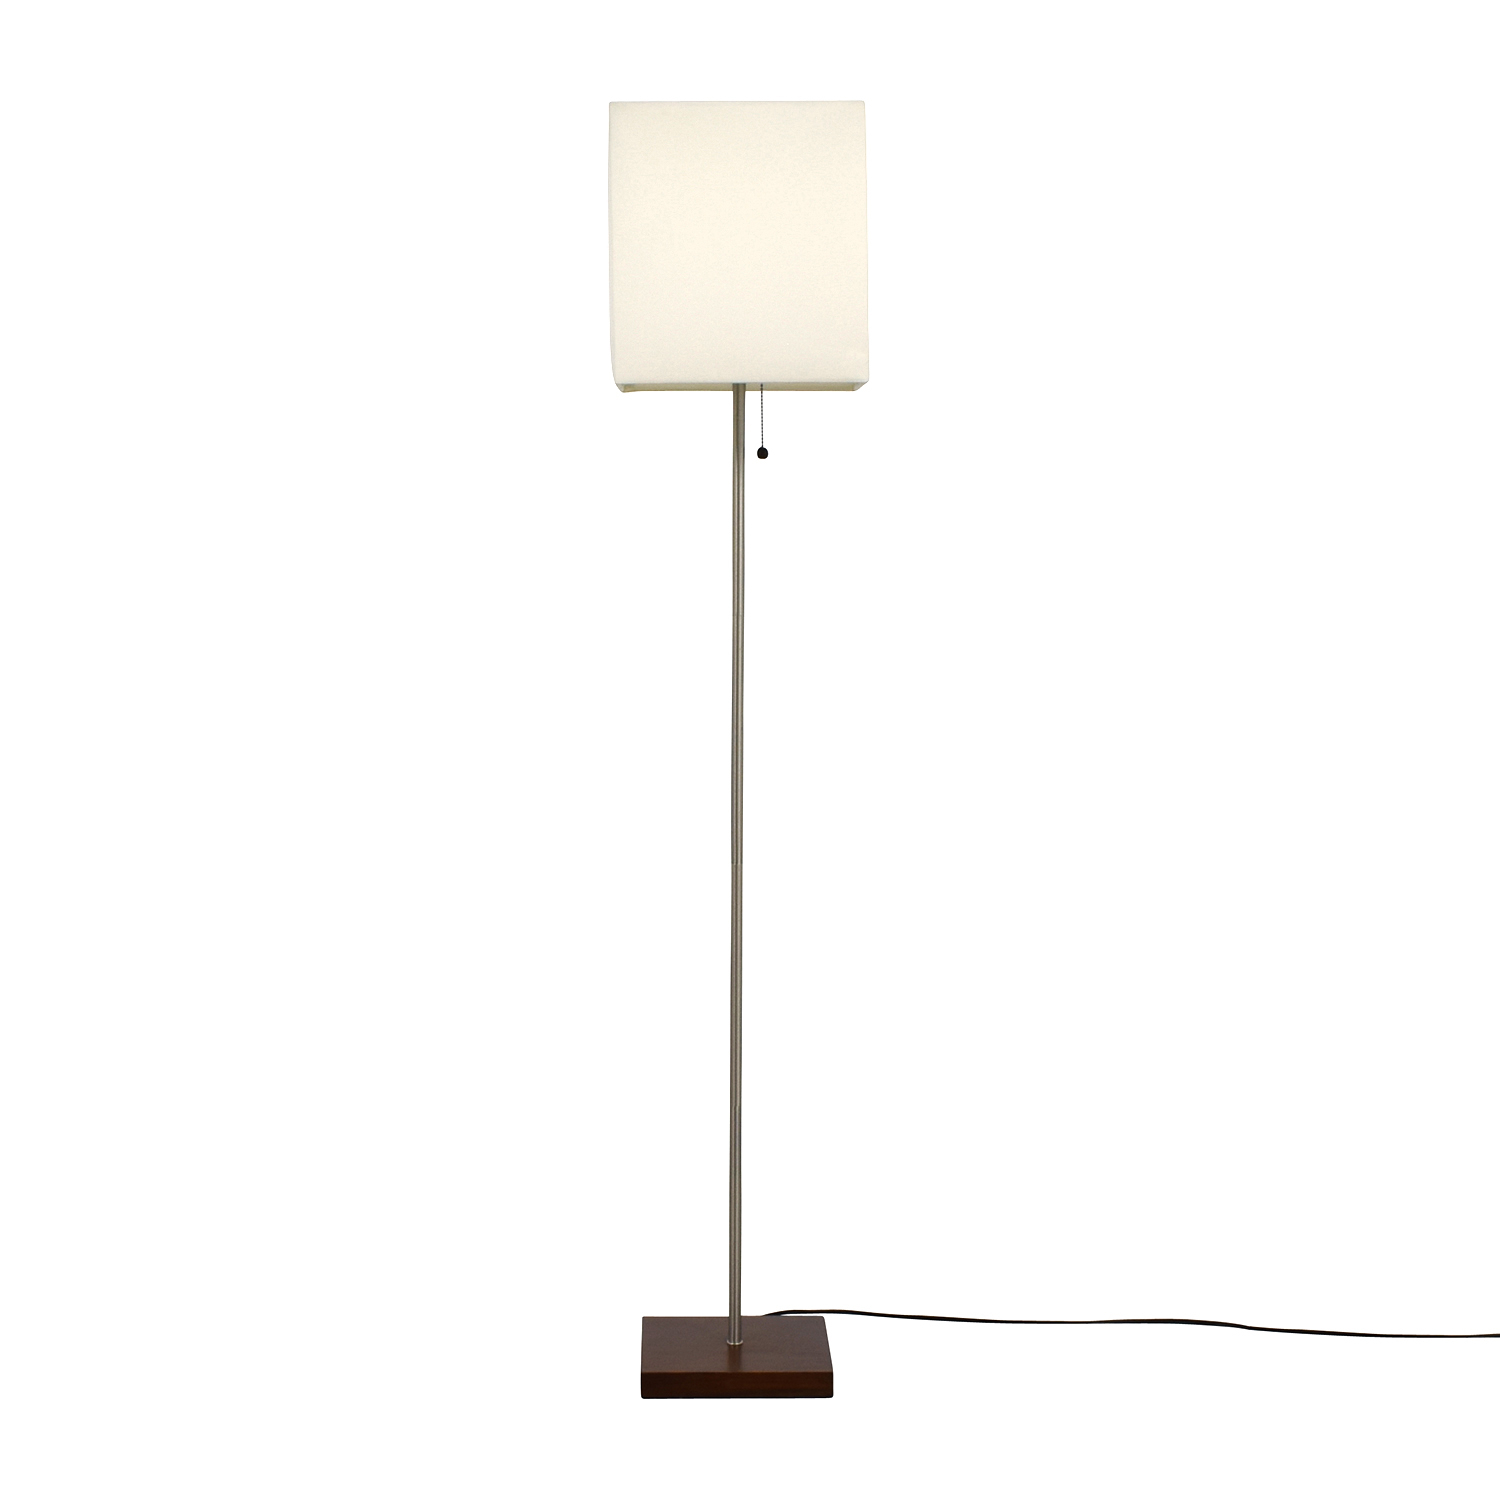 25 Off Target Target Classic Silver Floor Lamp Decor for sizing 1500 X 1500